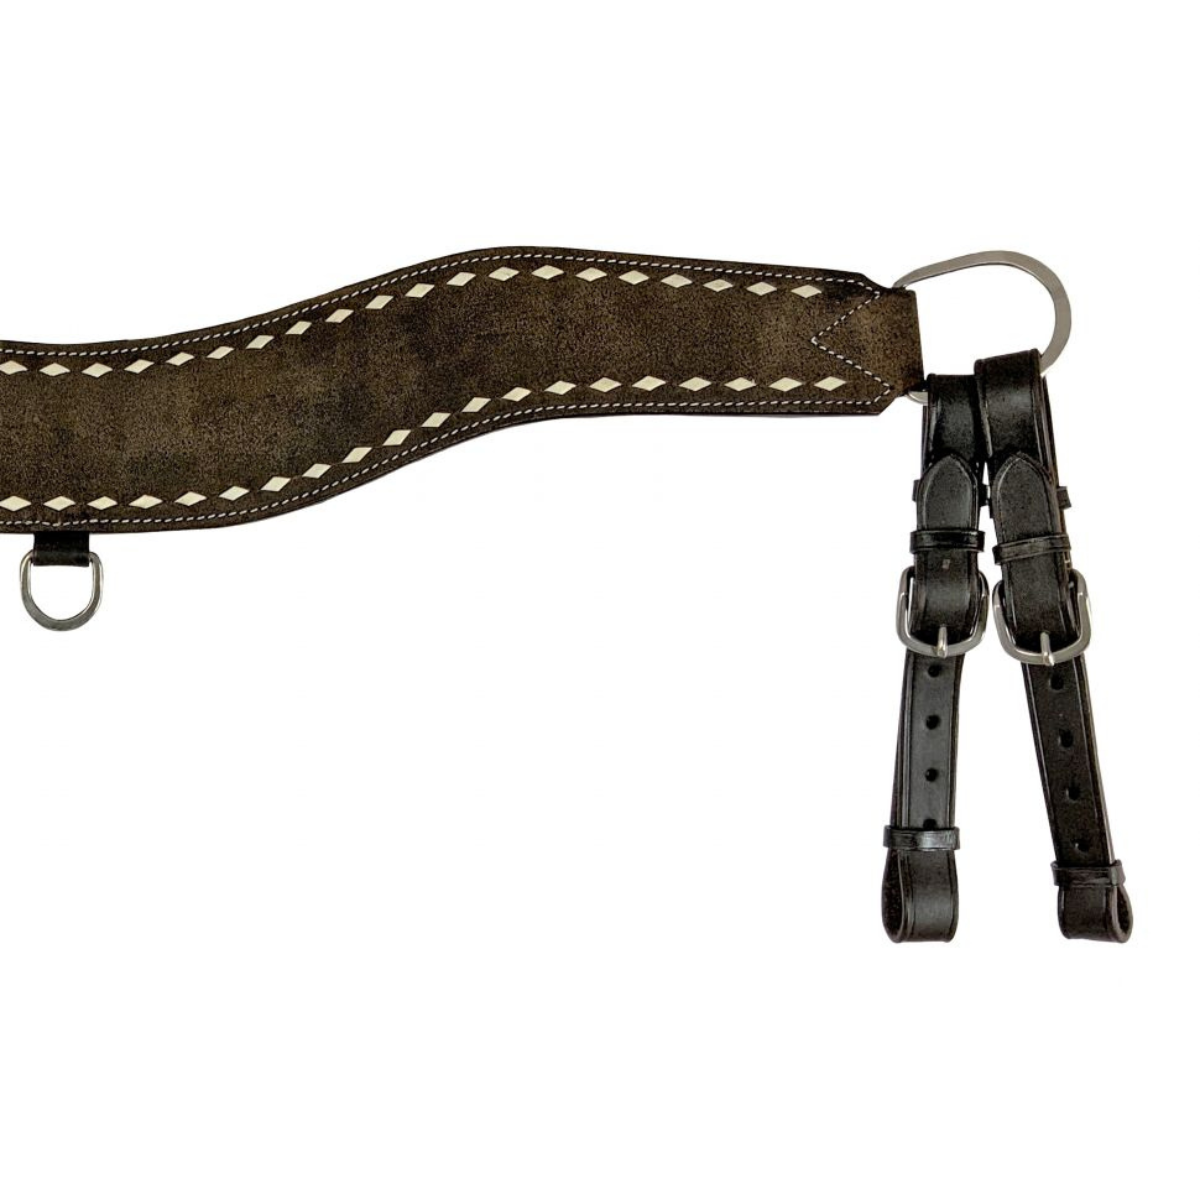 Showman ® Leather tripping collar with white buckstitch accent. - Double T Saddles